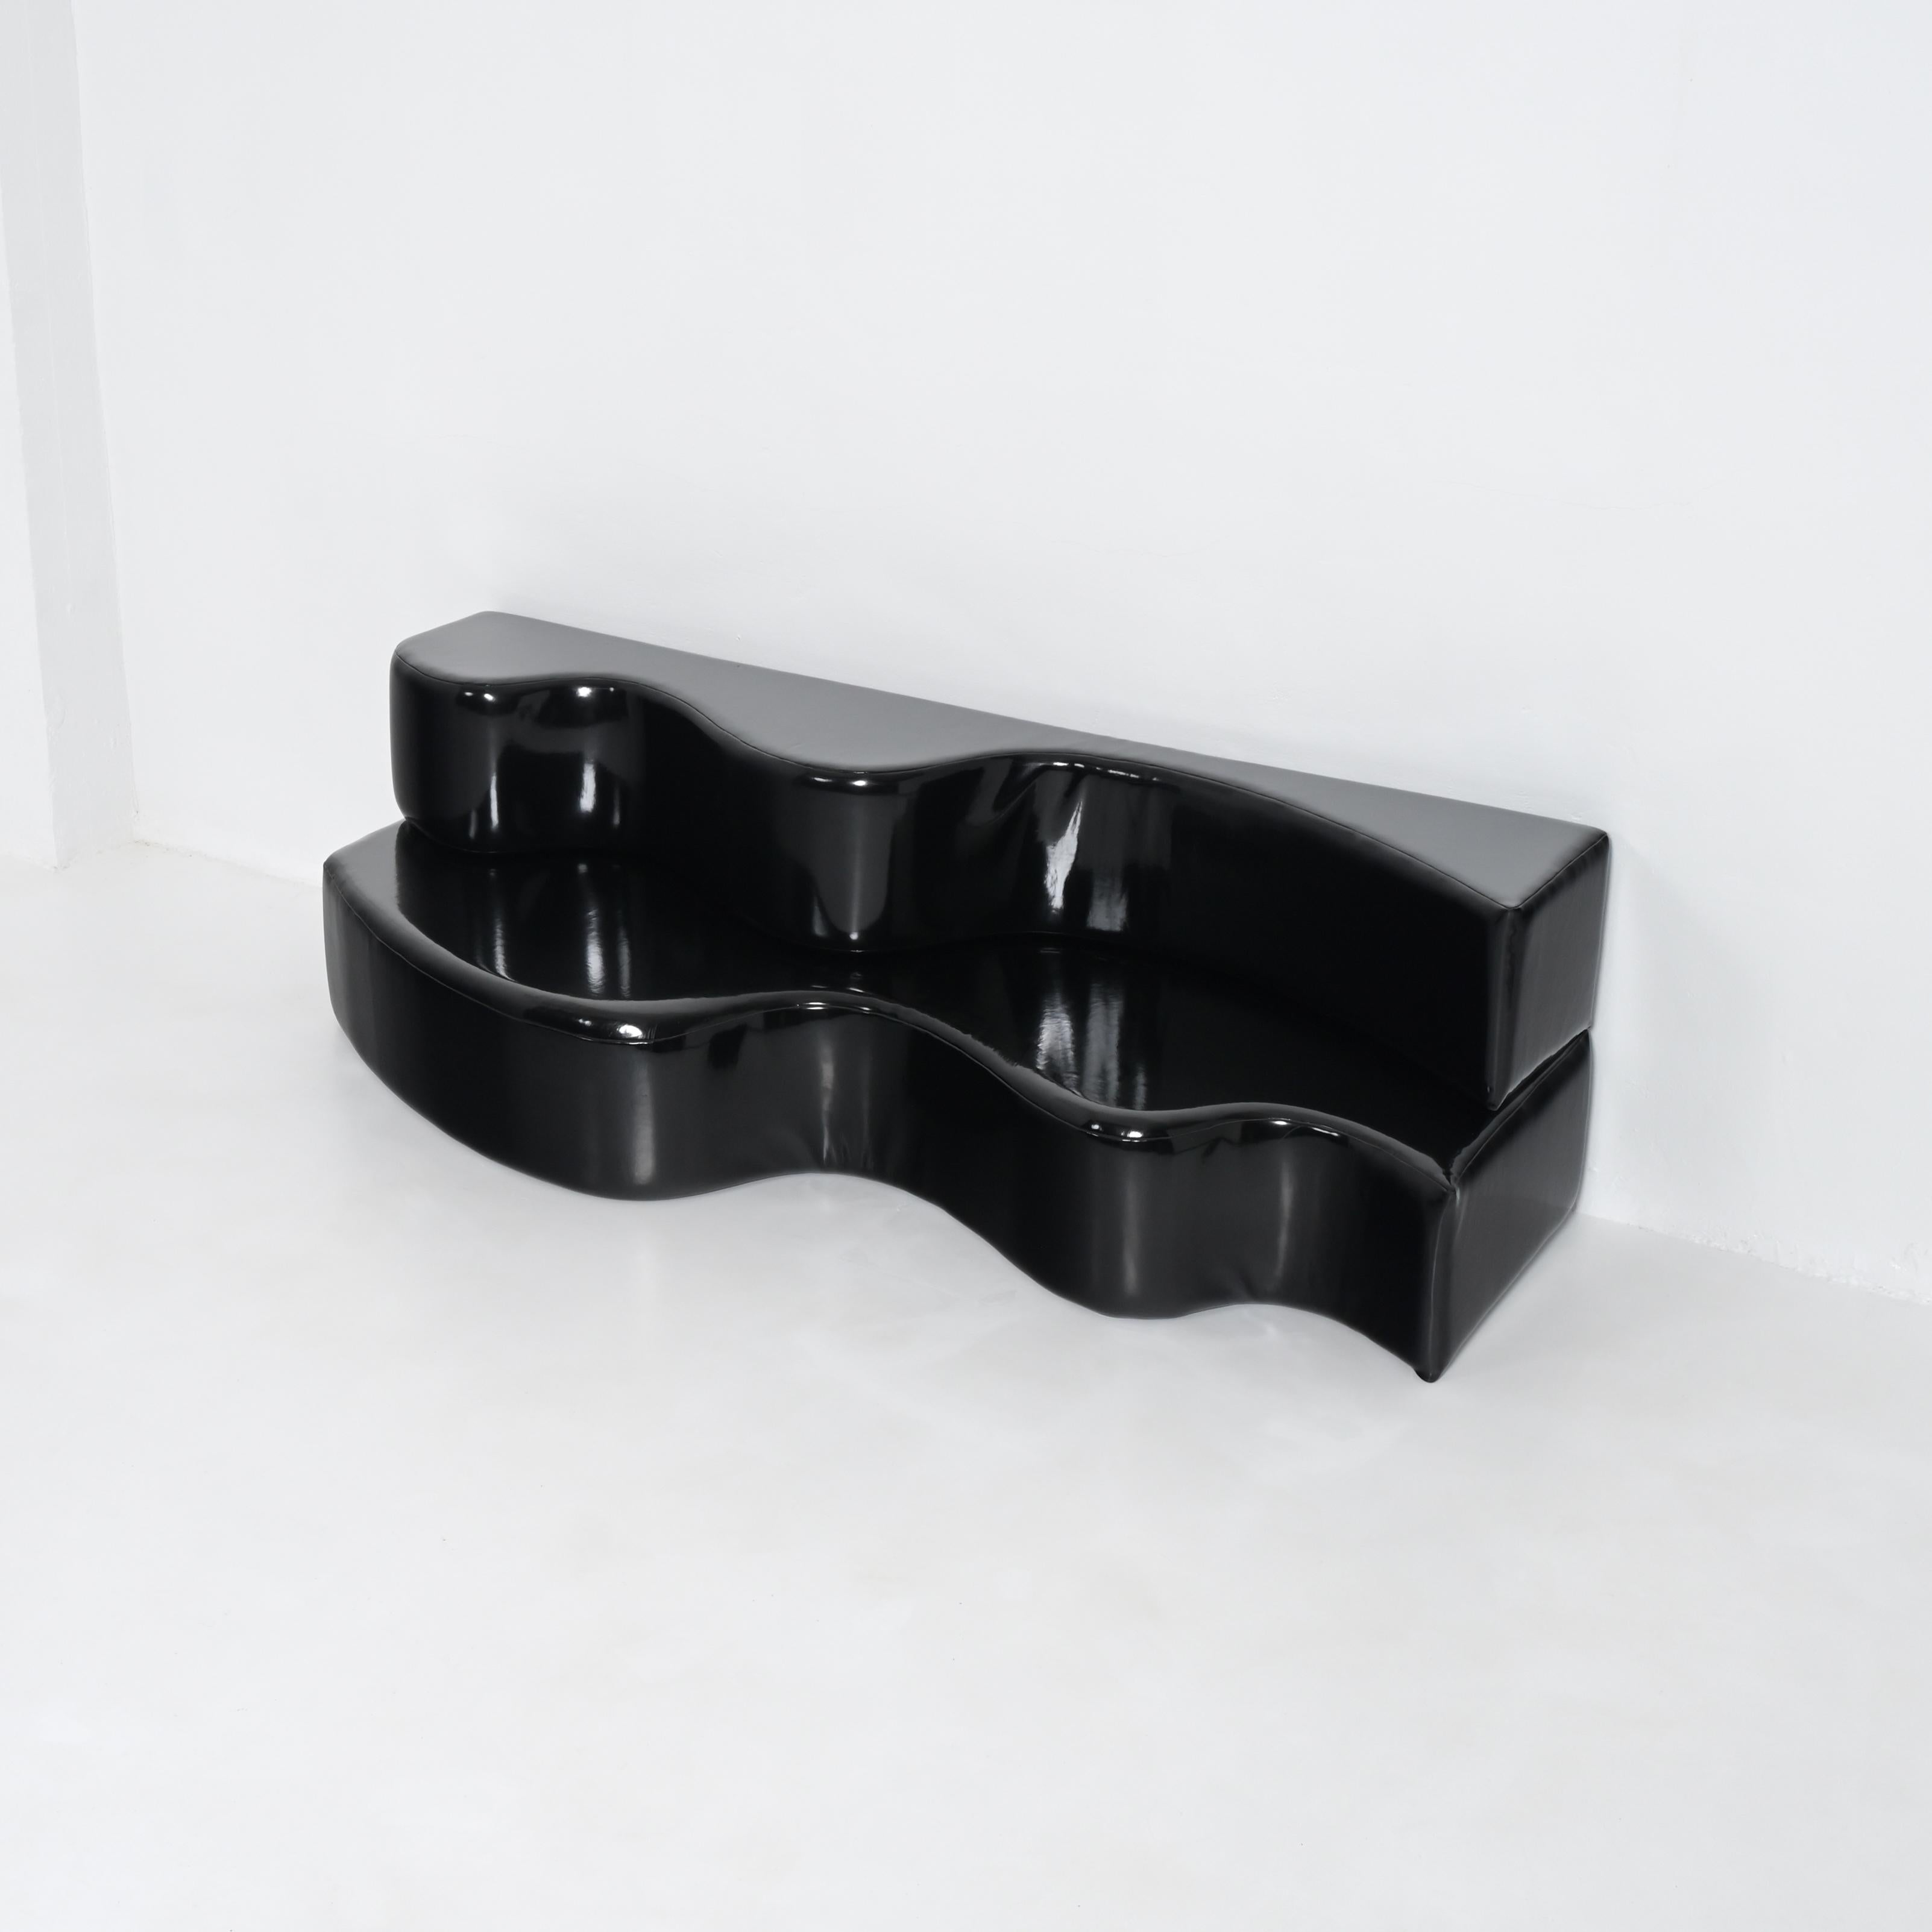 Designed in 1967 by the radical group Archizoom, this was the first sofa without a conventional frame. It is composed of two waves made from a polyurethane block cut into two parts with an S—shaped incision, which can be interlocked and stacked to